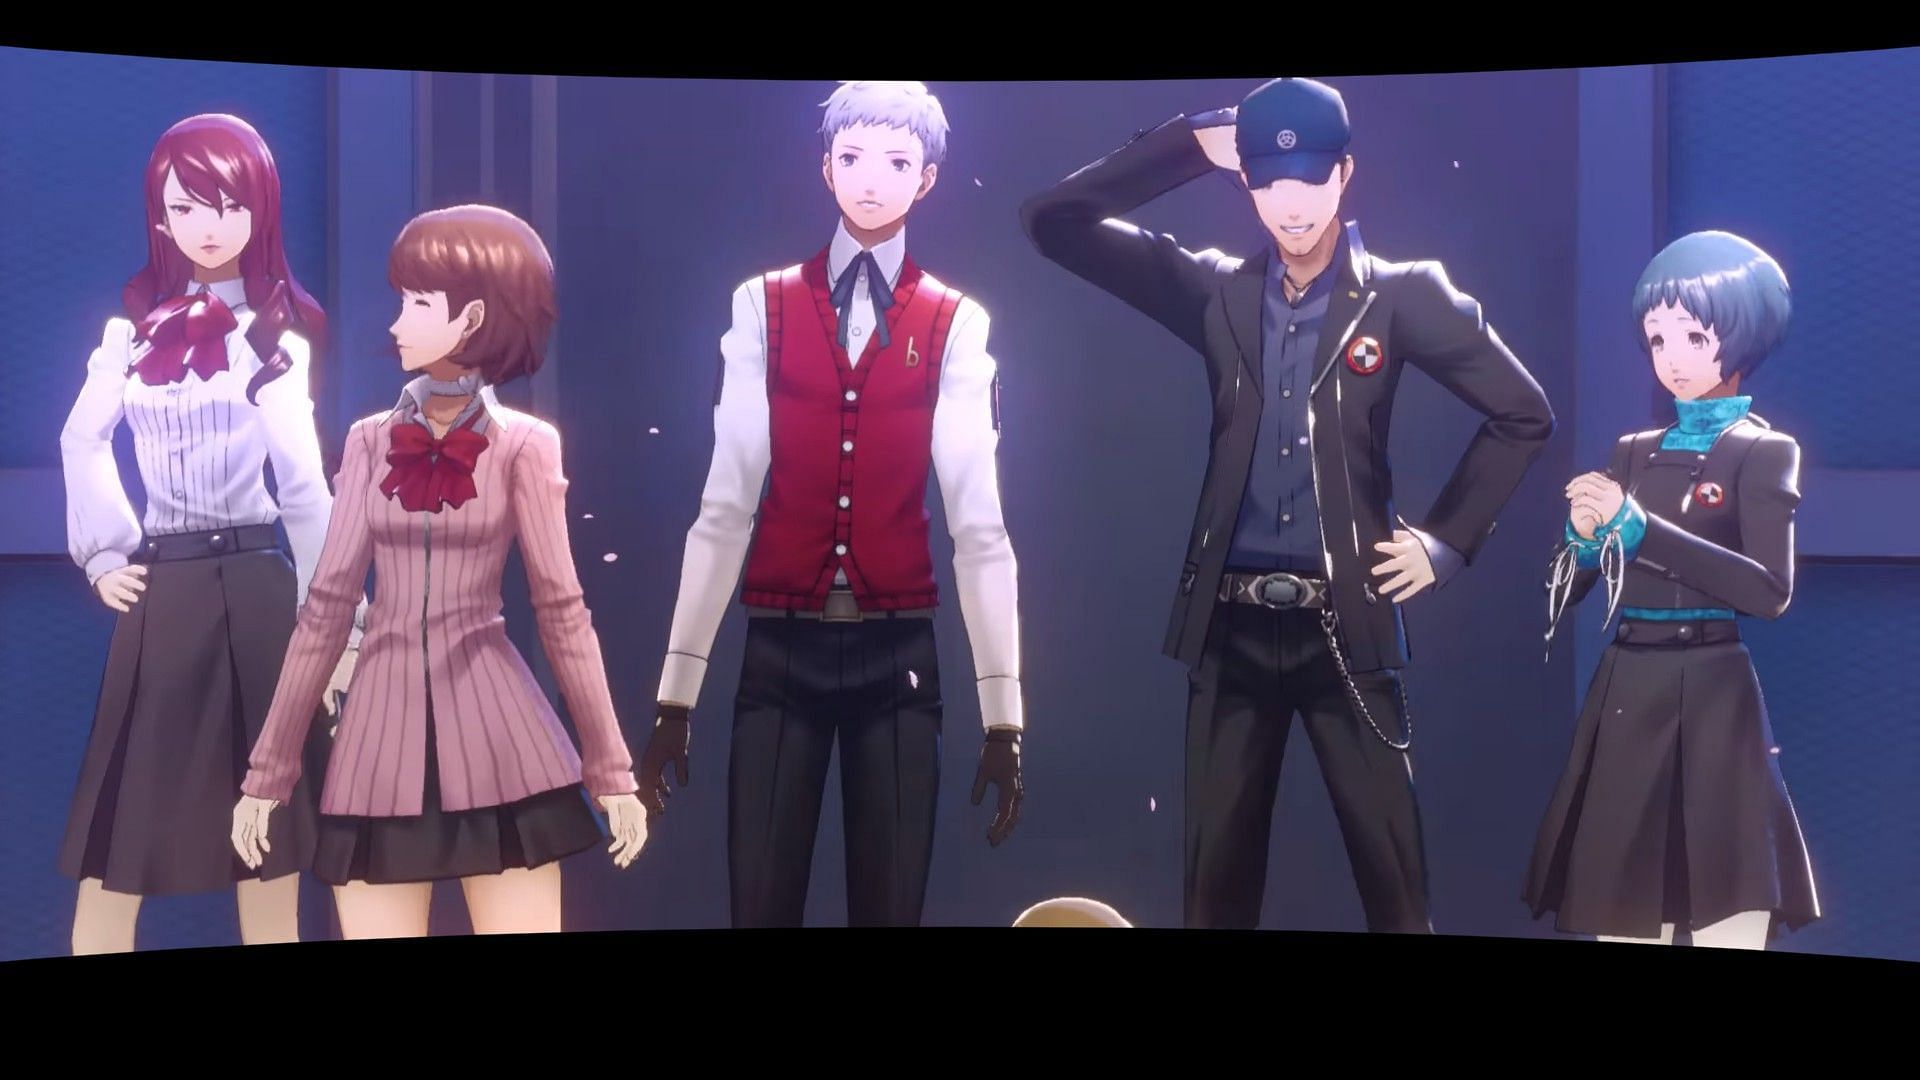 Persona 3 Reload ending explained: The promised day (Image via Atlus)